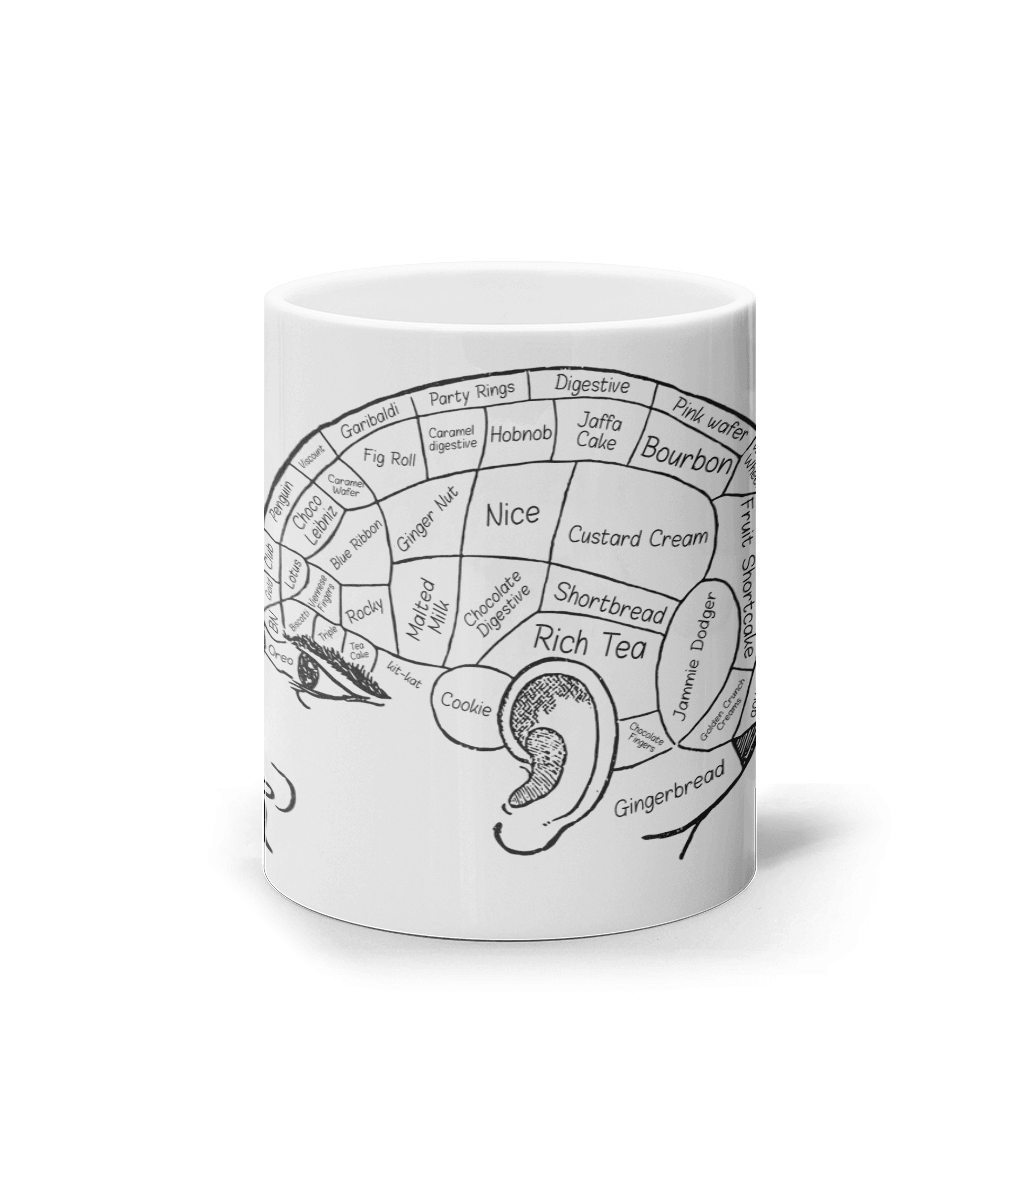 Favourite Biscuit Brain Gift Mug. Thinking of biscuits? - DuvetDay.co.uk